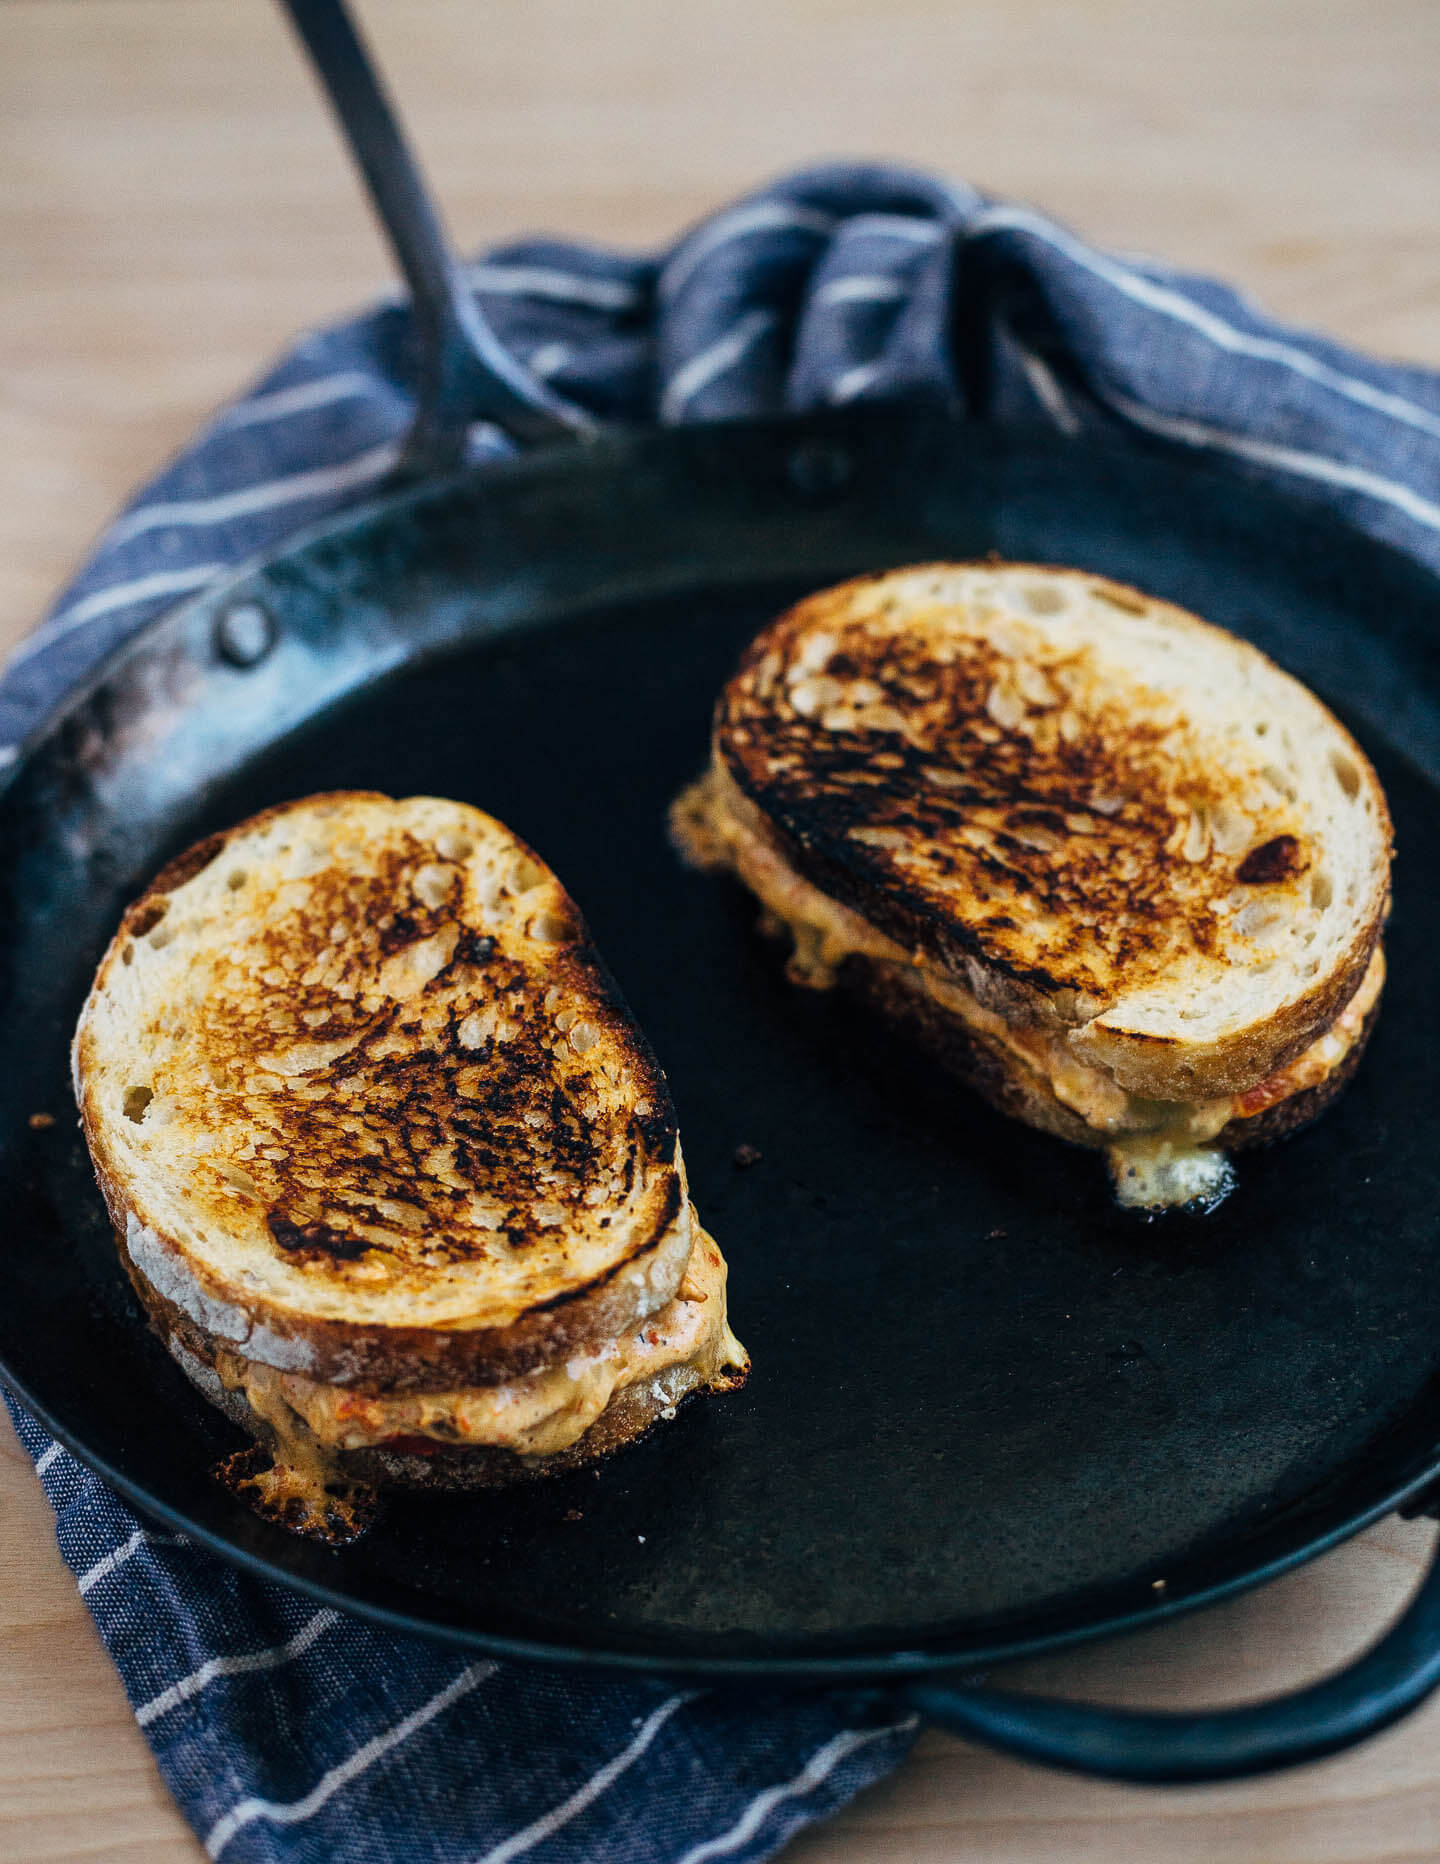 Delightfully gooey and rich grilled pimento cheese sandwiches.